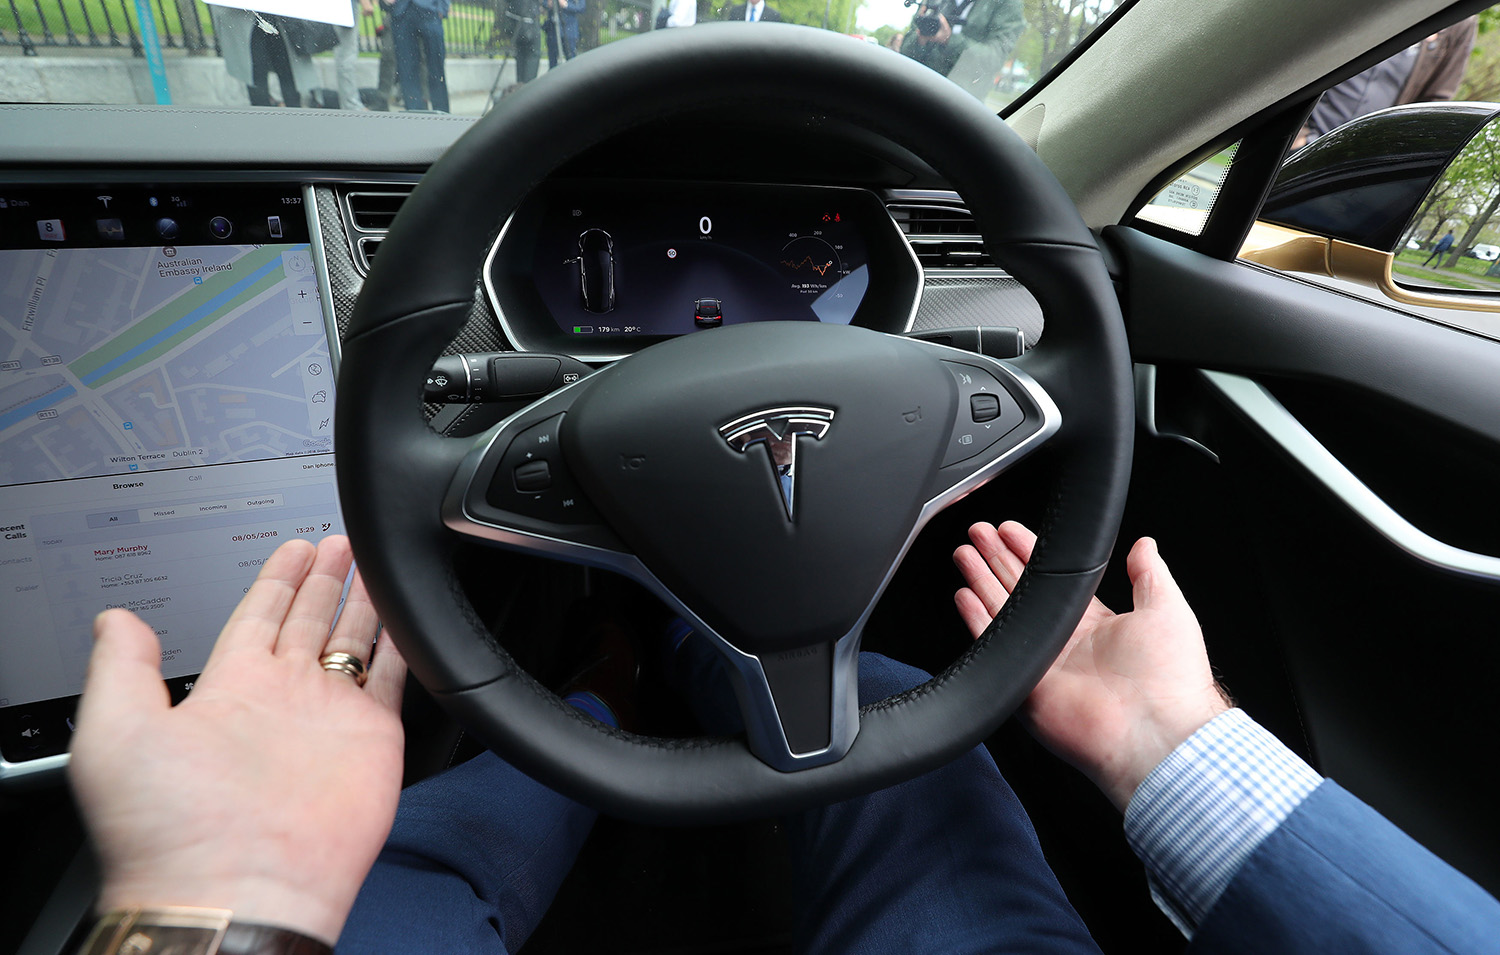 Dan Kiely, CEO of Voxpro, takes his hands off the wheel of his Tesla Model S car at a launch event for the MobilityX self-driving conference, a gathering of global autonomous vehicle leaders, in Dublin.